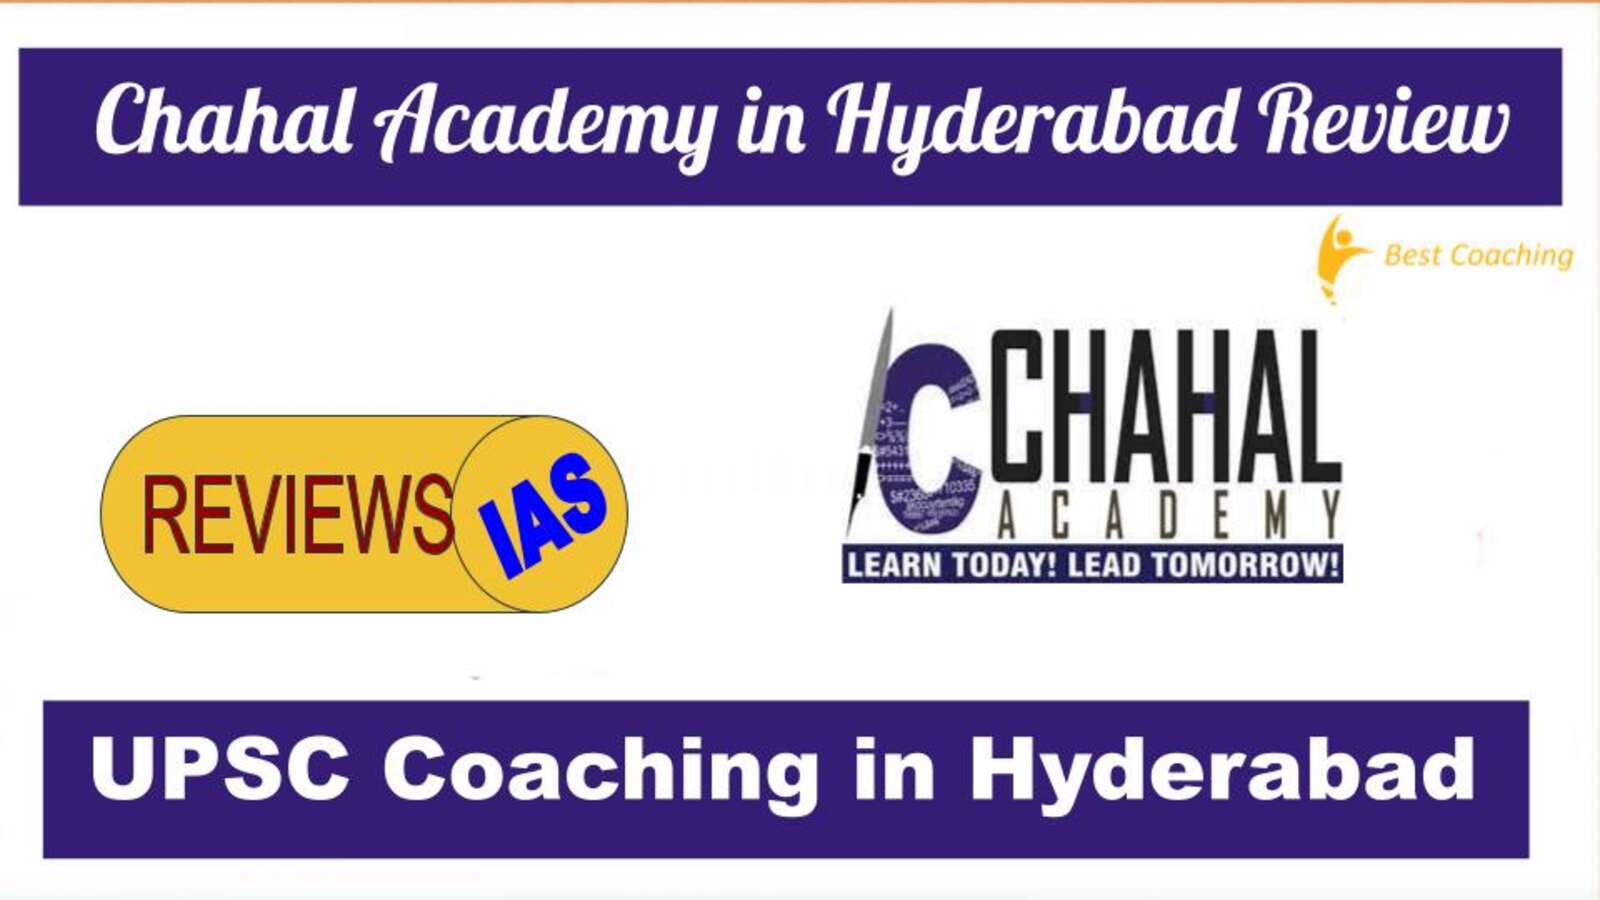 Chahal Academy Institute in Hyderabad